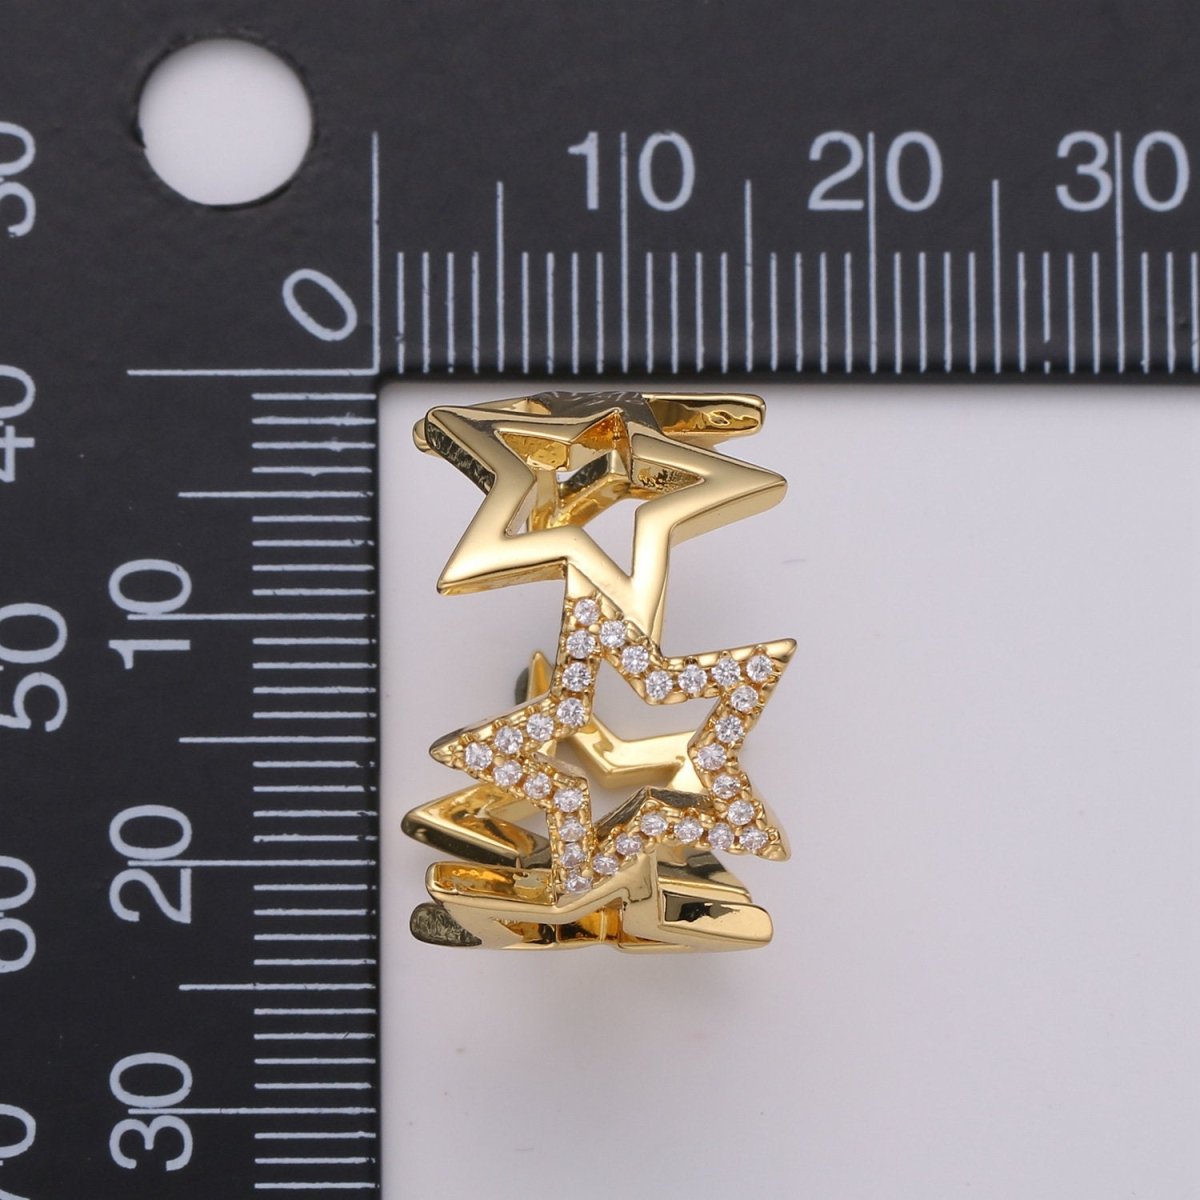 Gold Star Ring, Dainty Star Ring, Adjustable Ring, Minimalist Star Ring, Minimalist Ring, Gold Open Ring, Celestial Jewelry R-090 - DLUXCA